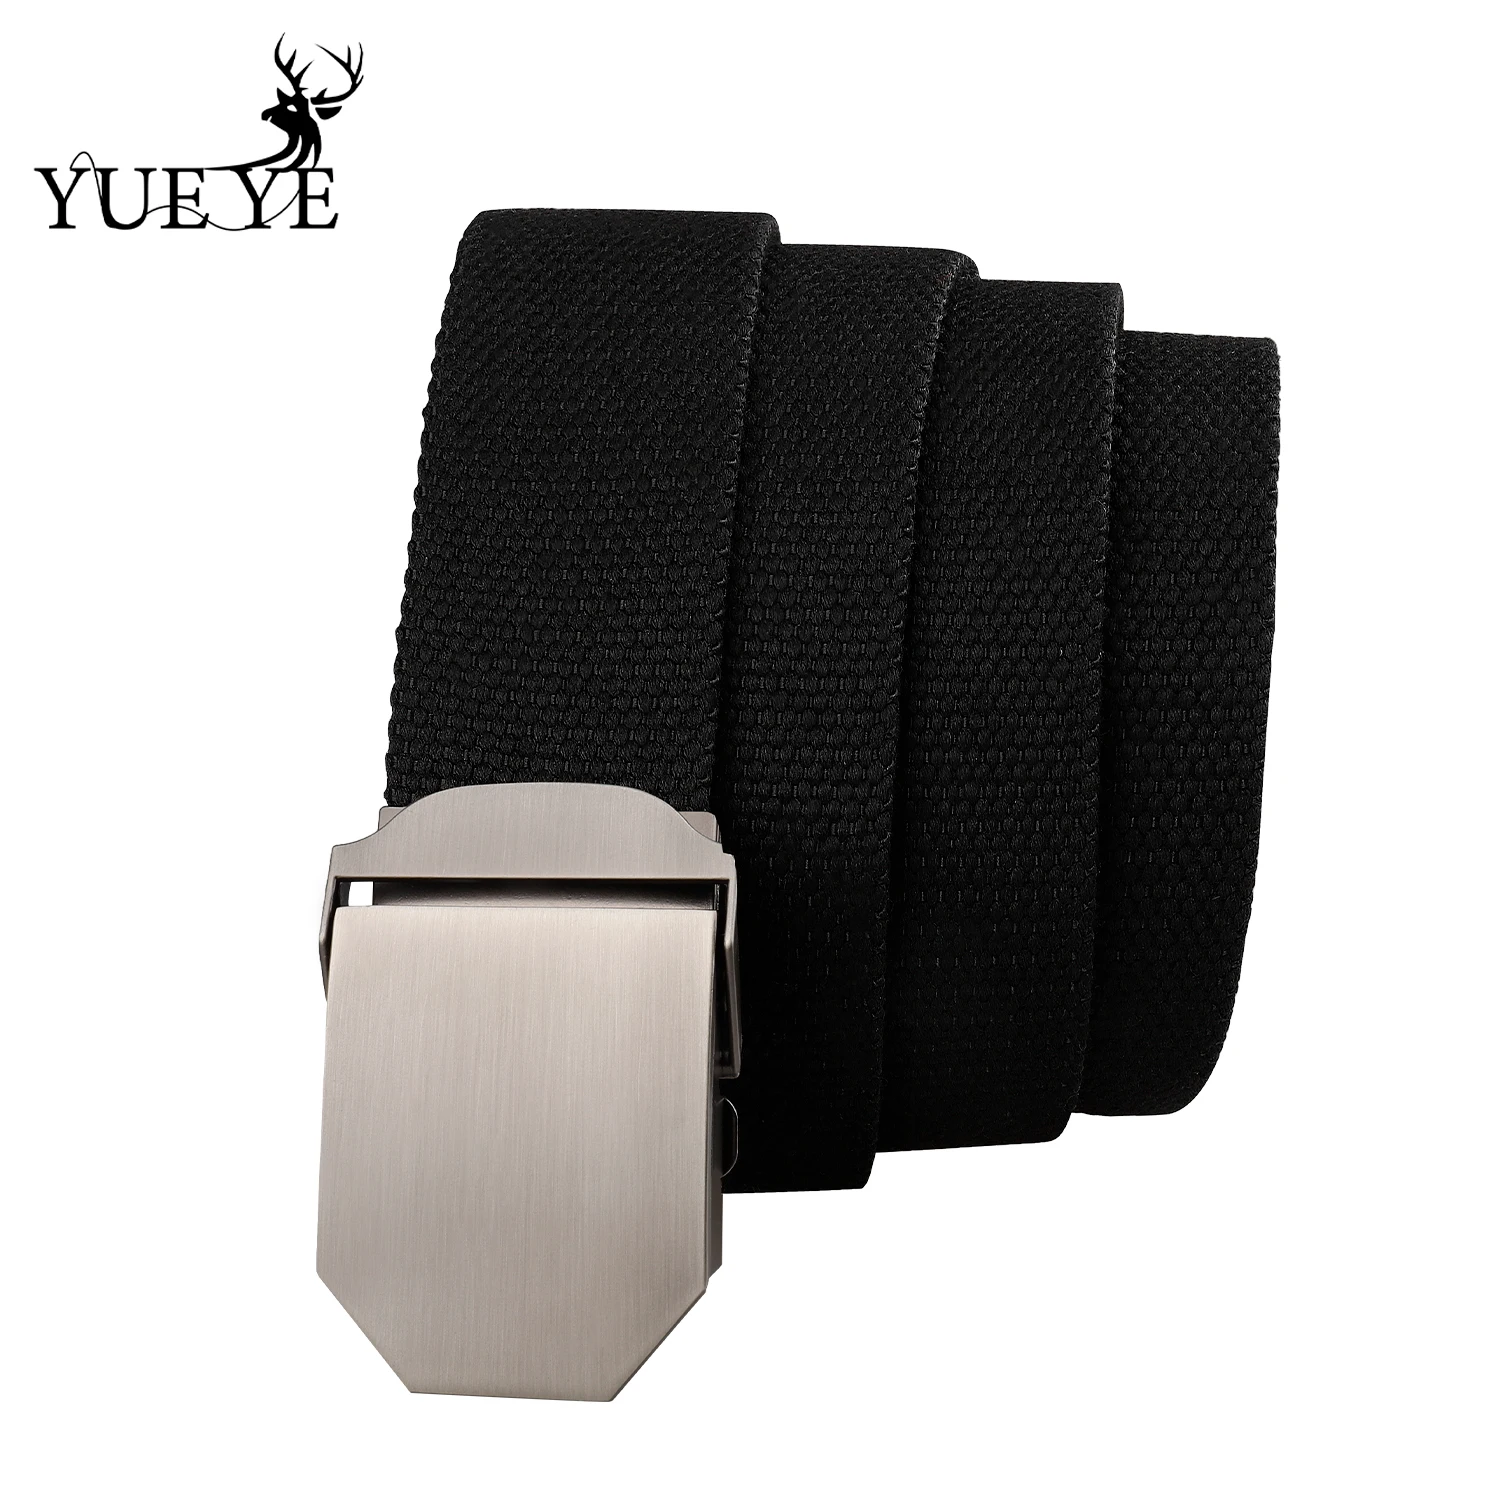 New Men's Outdoor Breathable Belt Canvas Belt Military Nylon Sports Fashion High Quality Jeans Belt